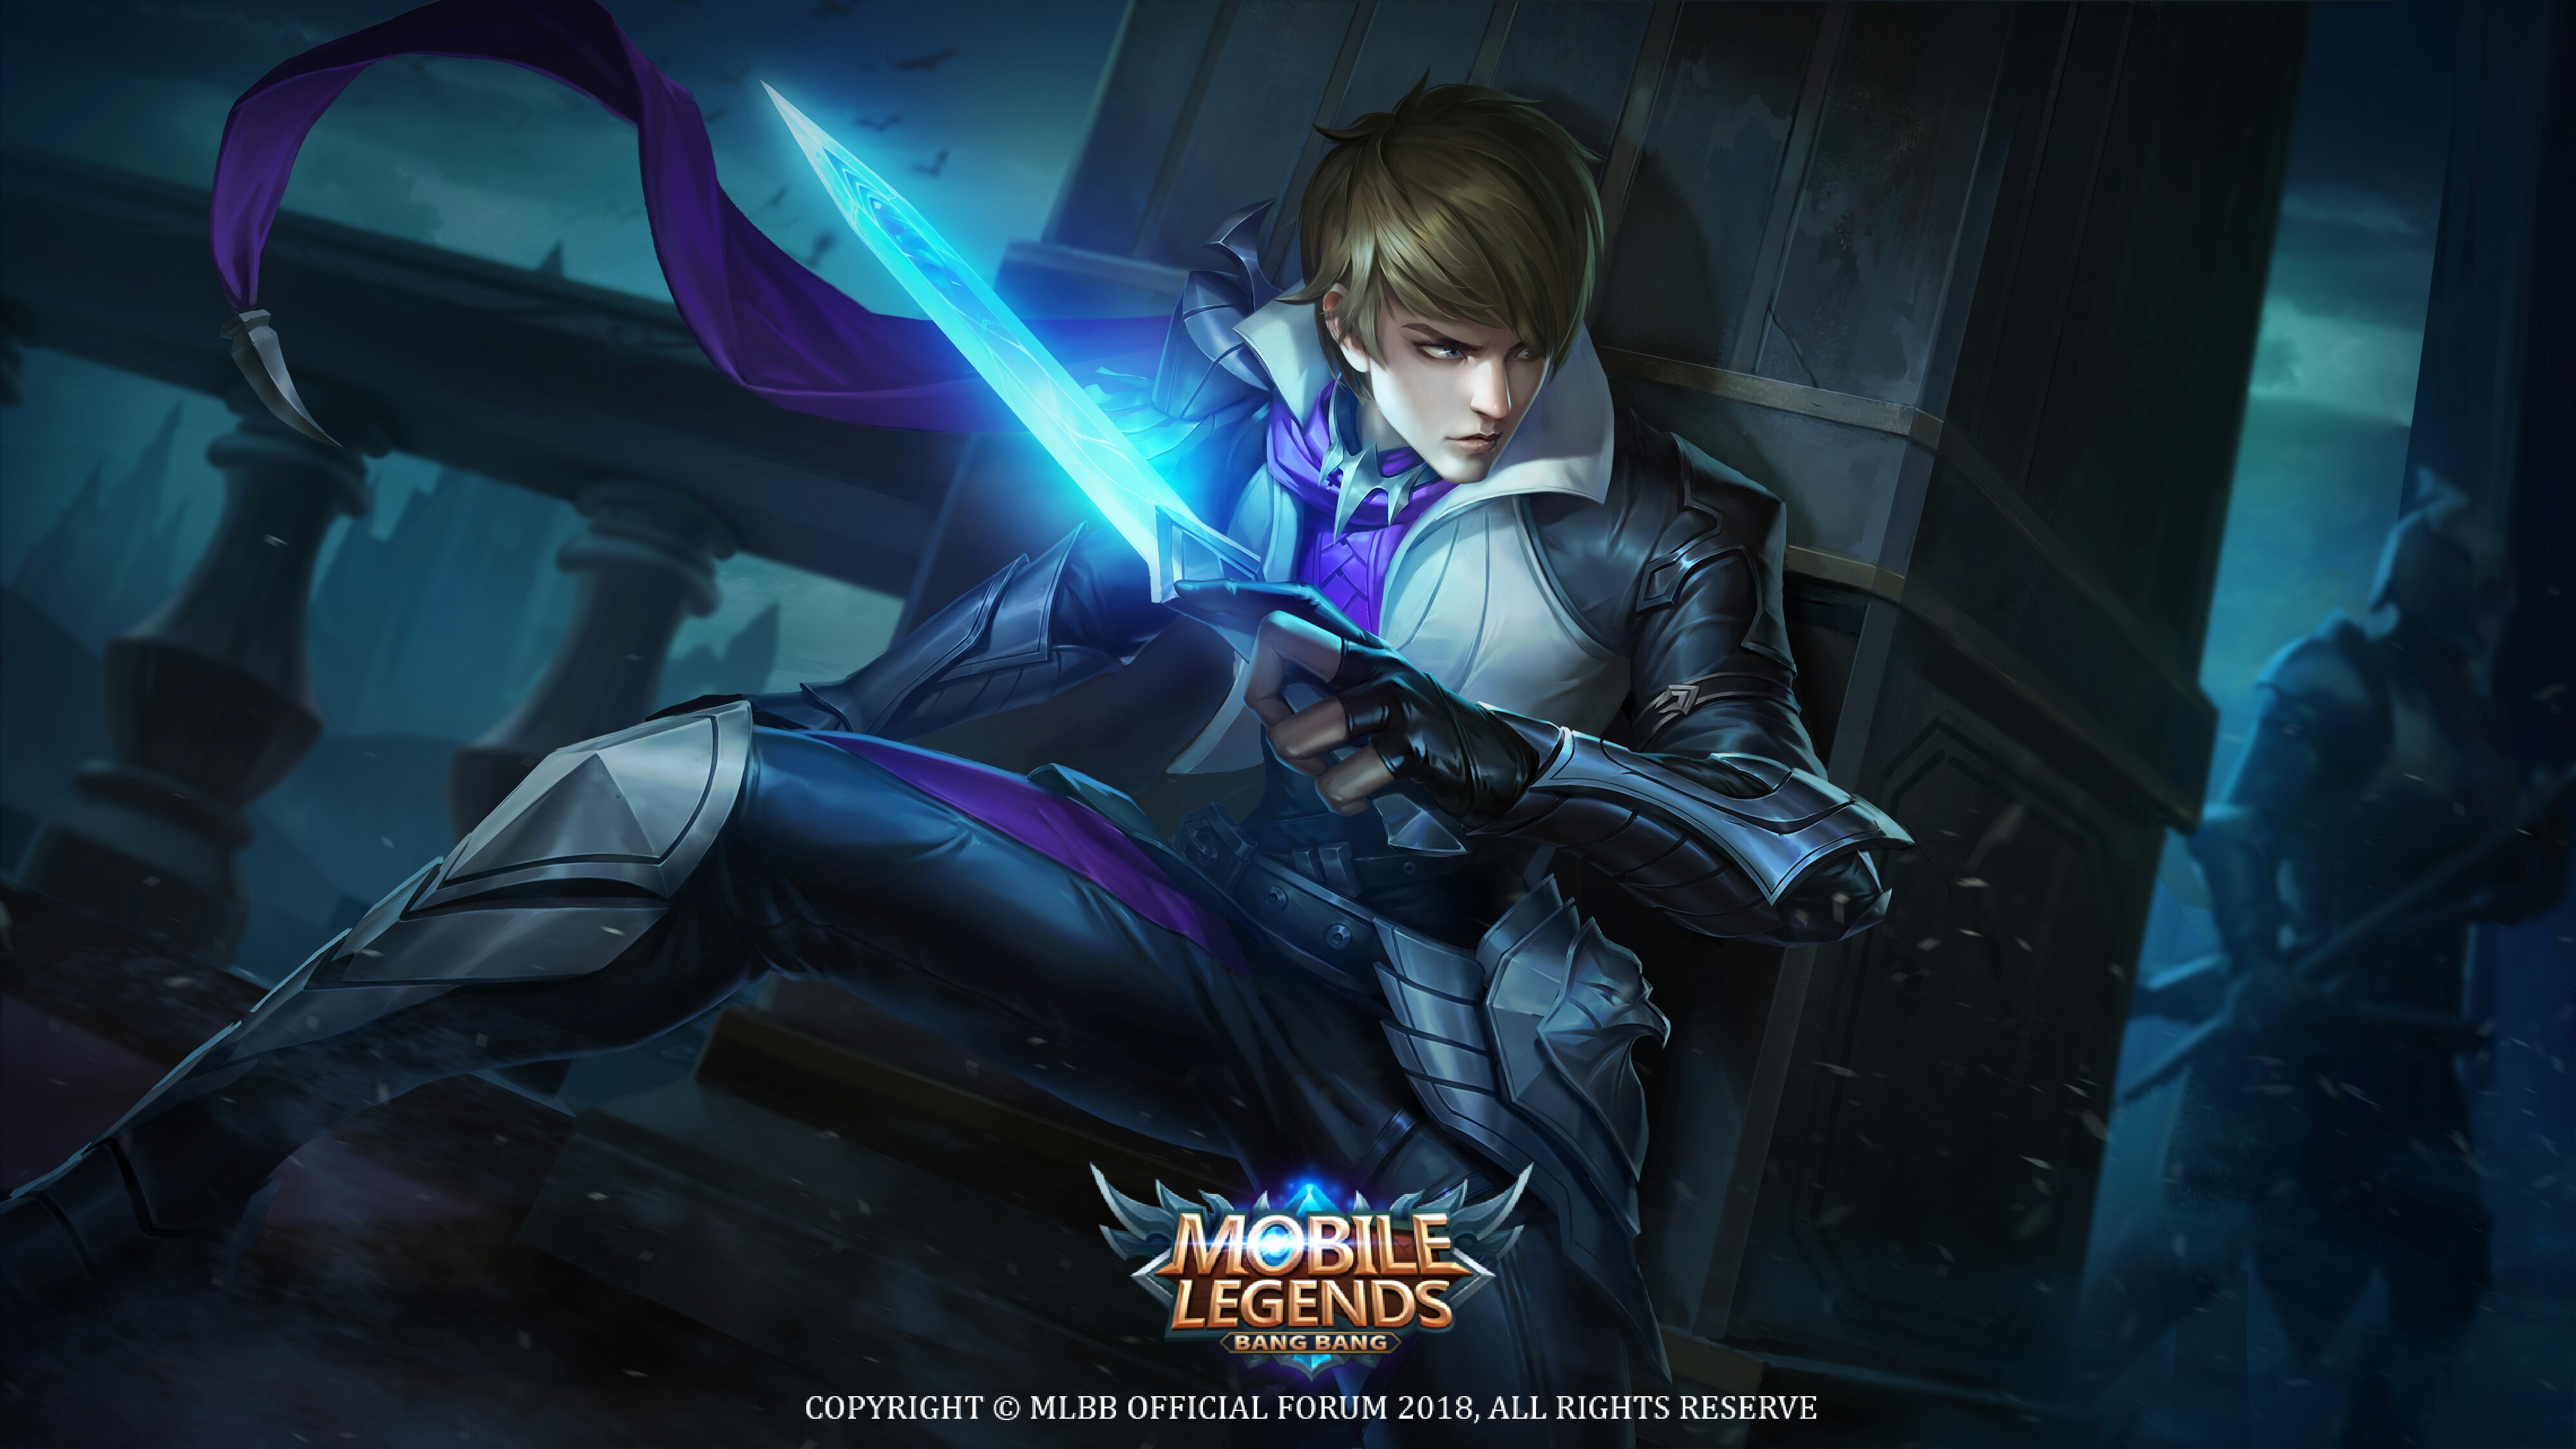 Mobile Legends Wallpaper Hd For Pc